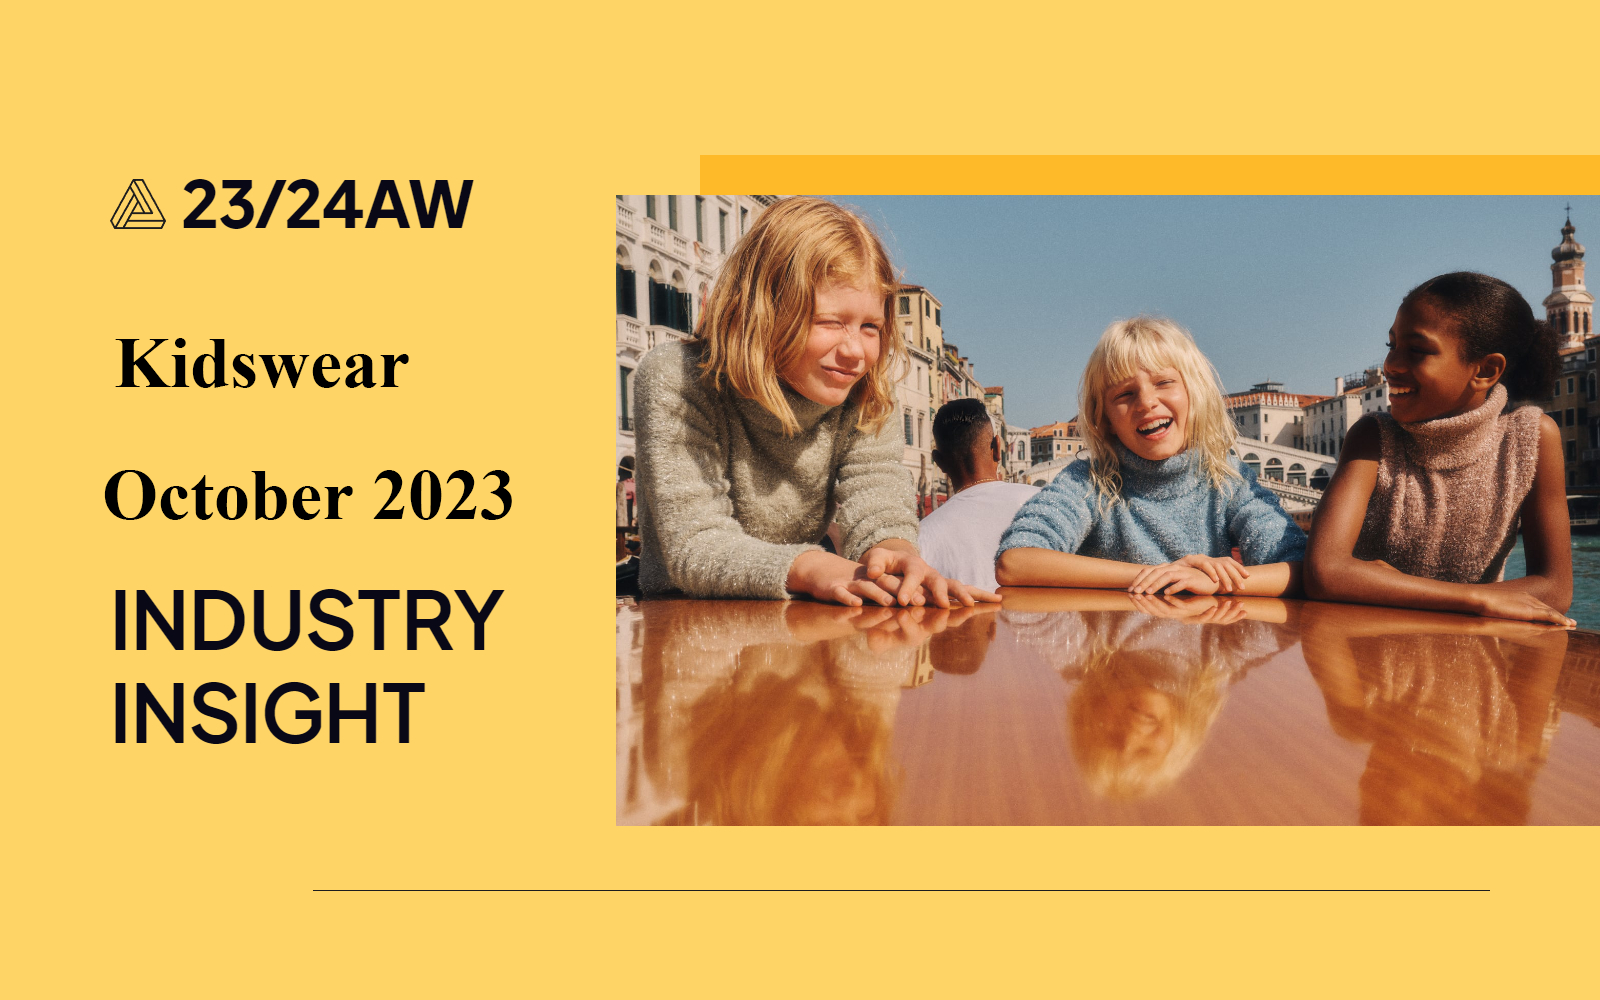 October 2023 -- The Industry Insight of Kidswear